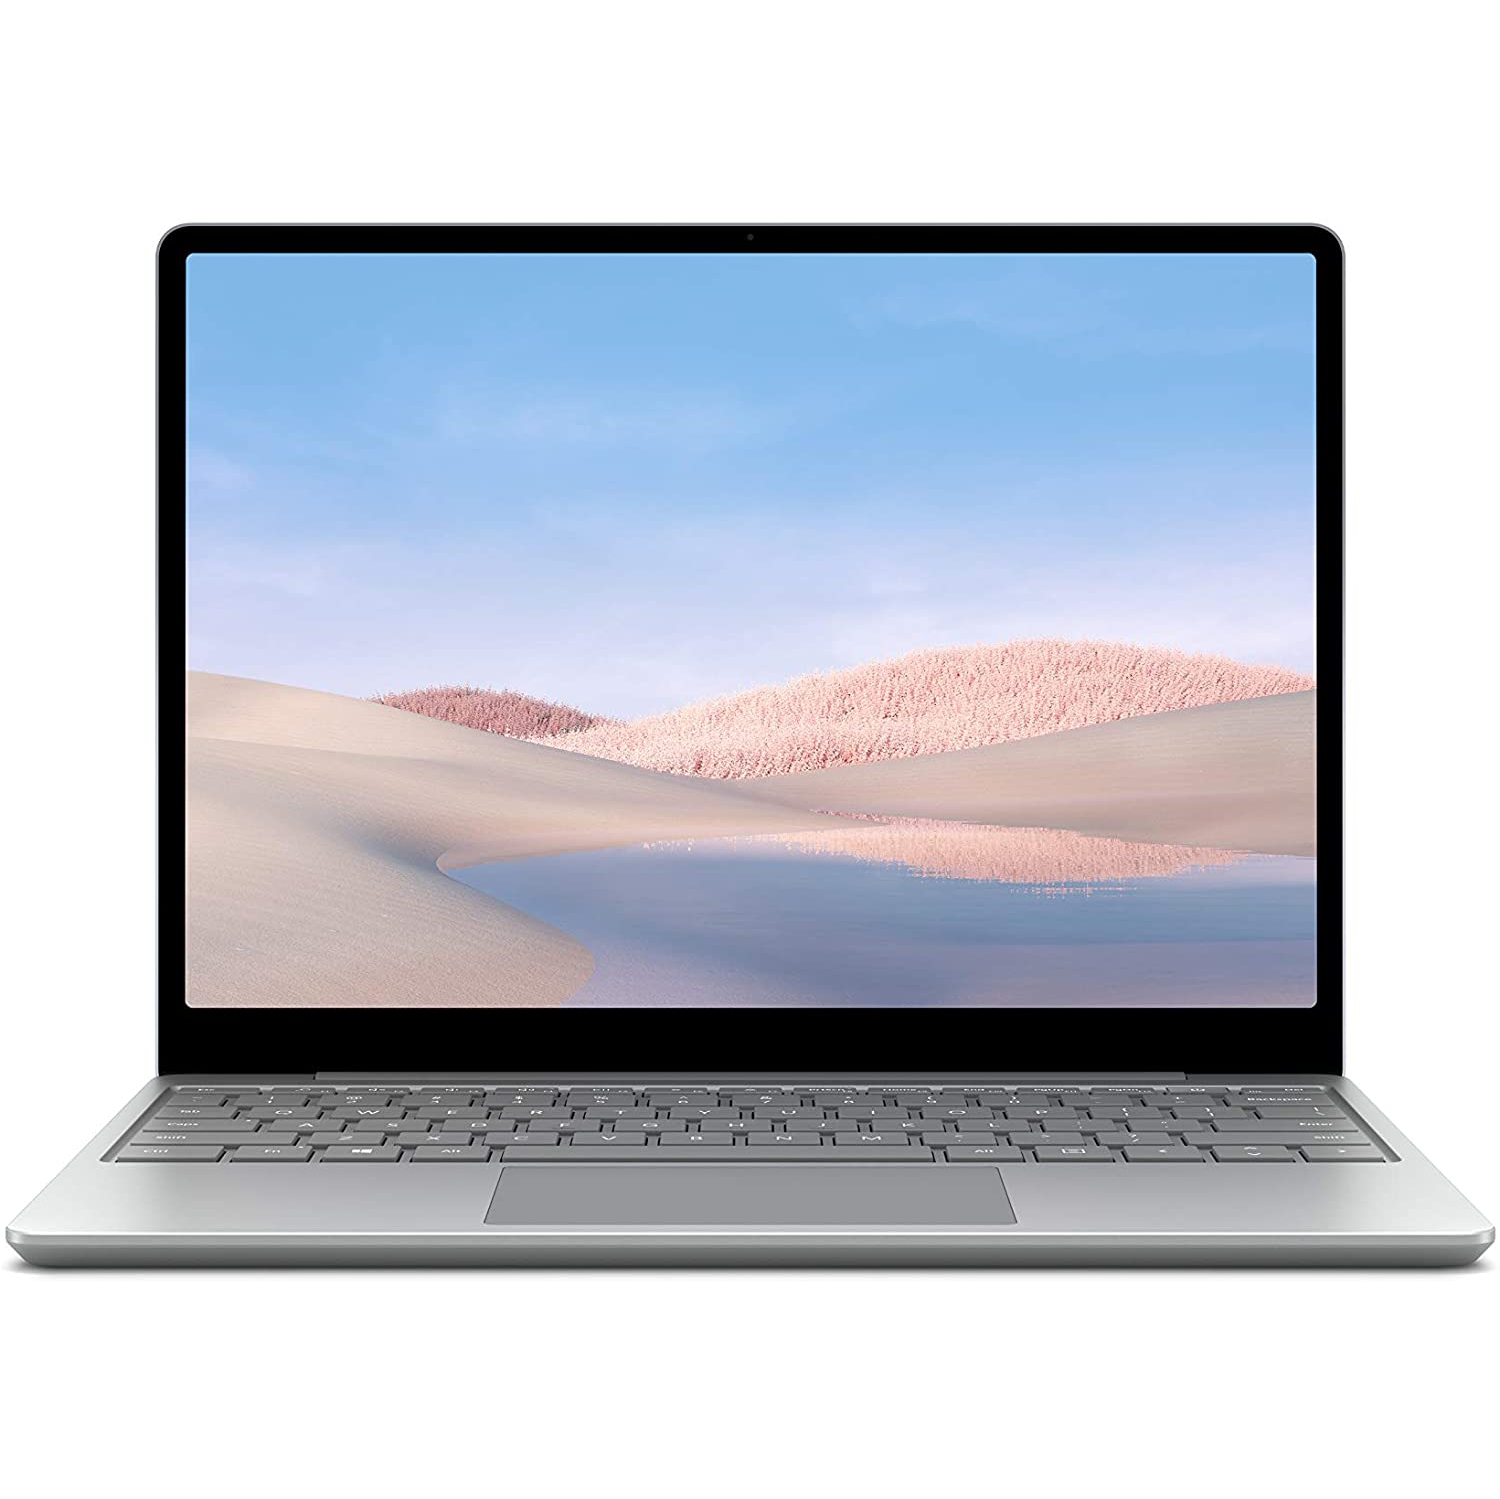 Refurbished (Excellent) - Microsoft Surface Laptop Go 12.4" Multi-Touch - Intel Core i5, 8GB RAM, 128GB SSD, Windows 10 Home in S Mode - Platinum - Certified Refurbished